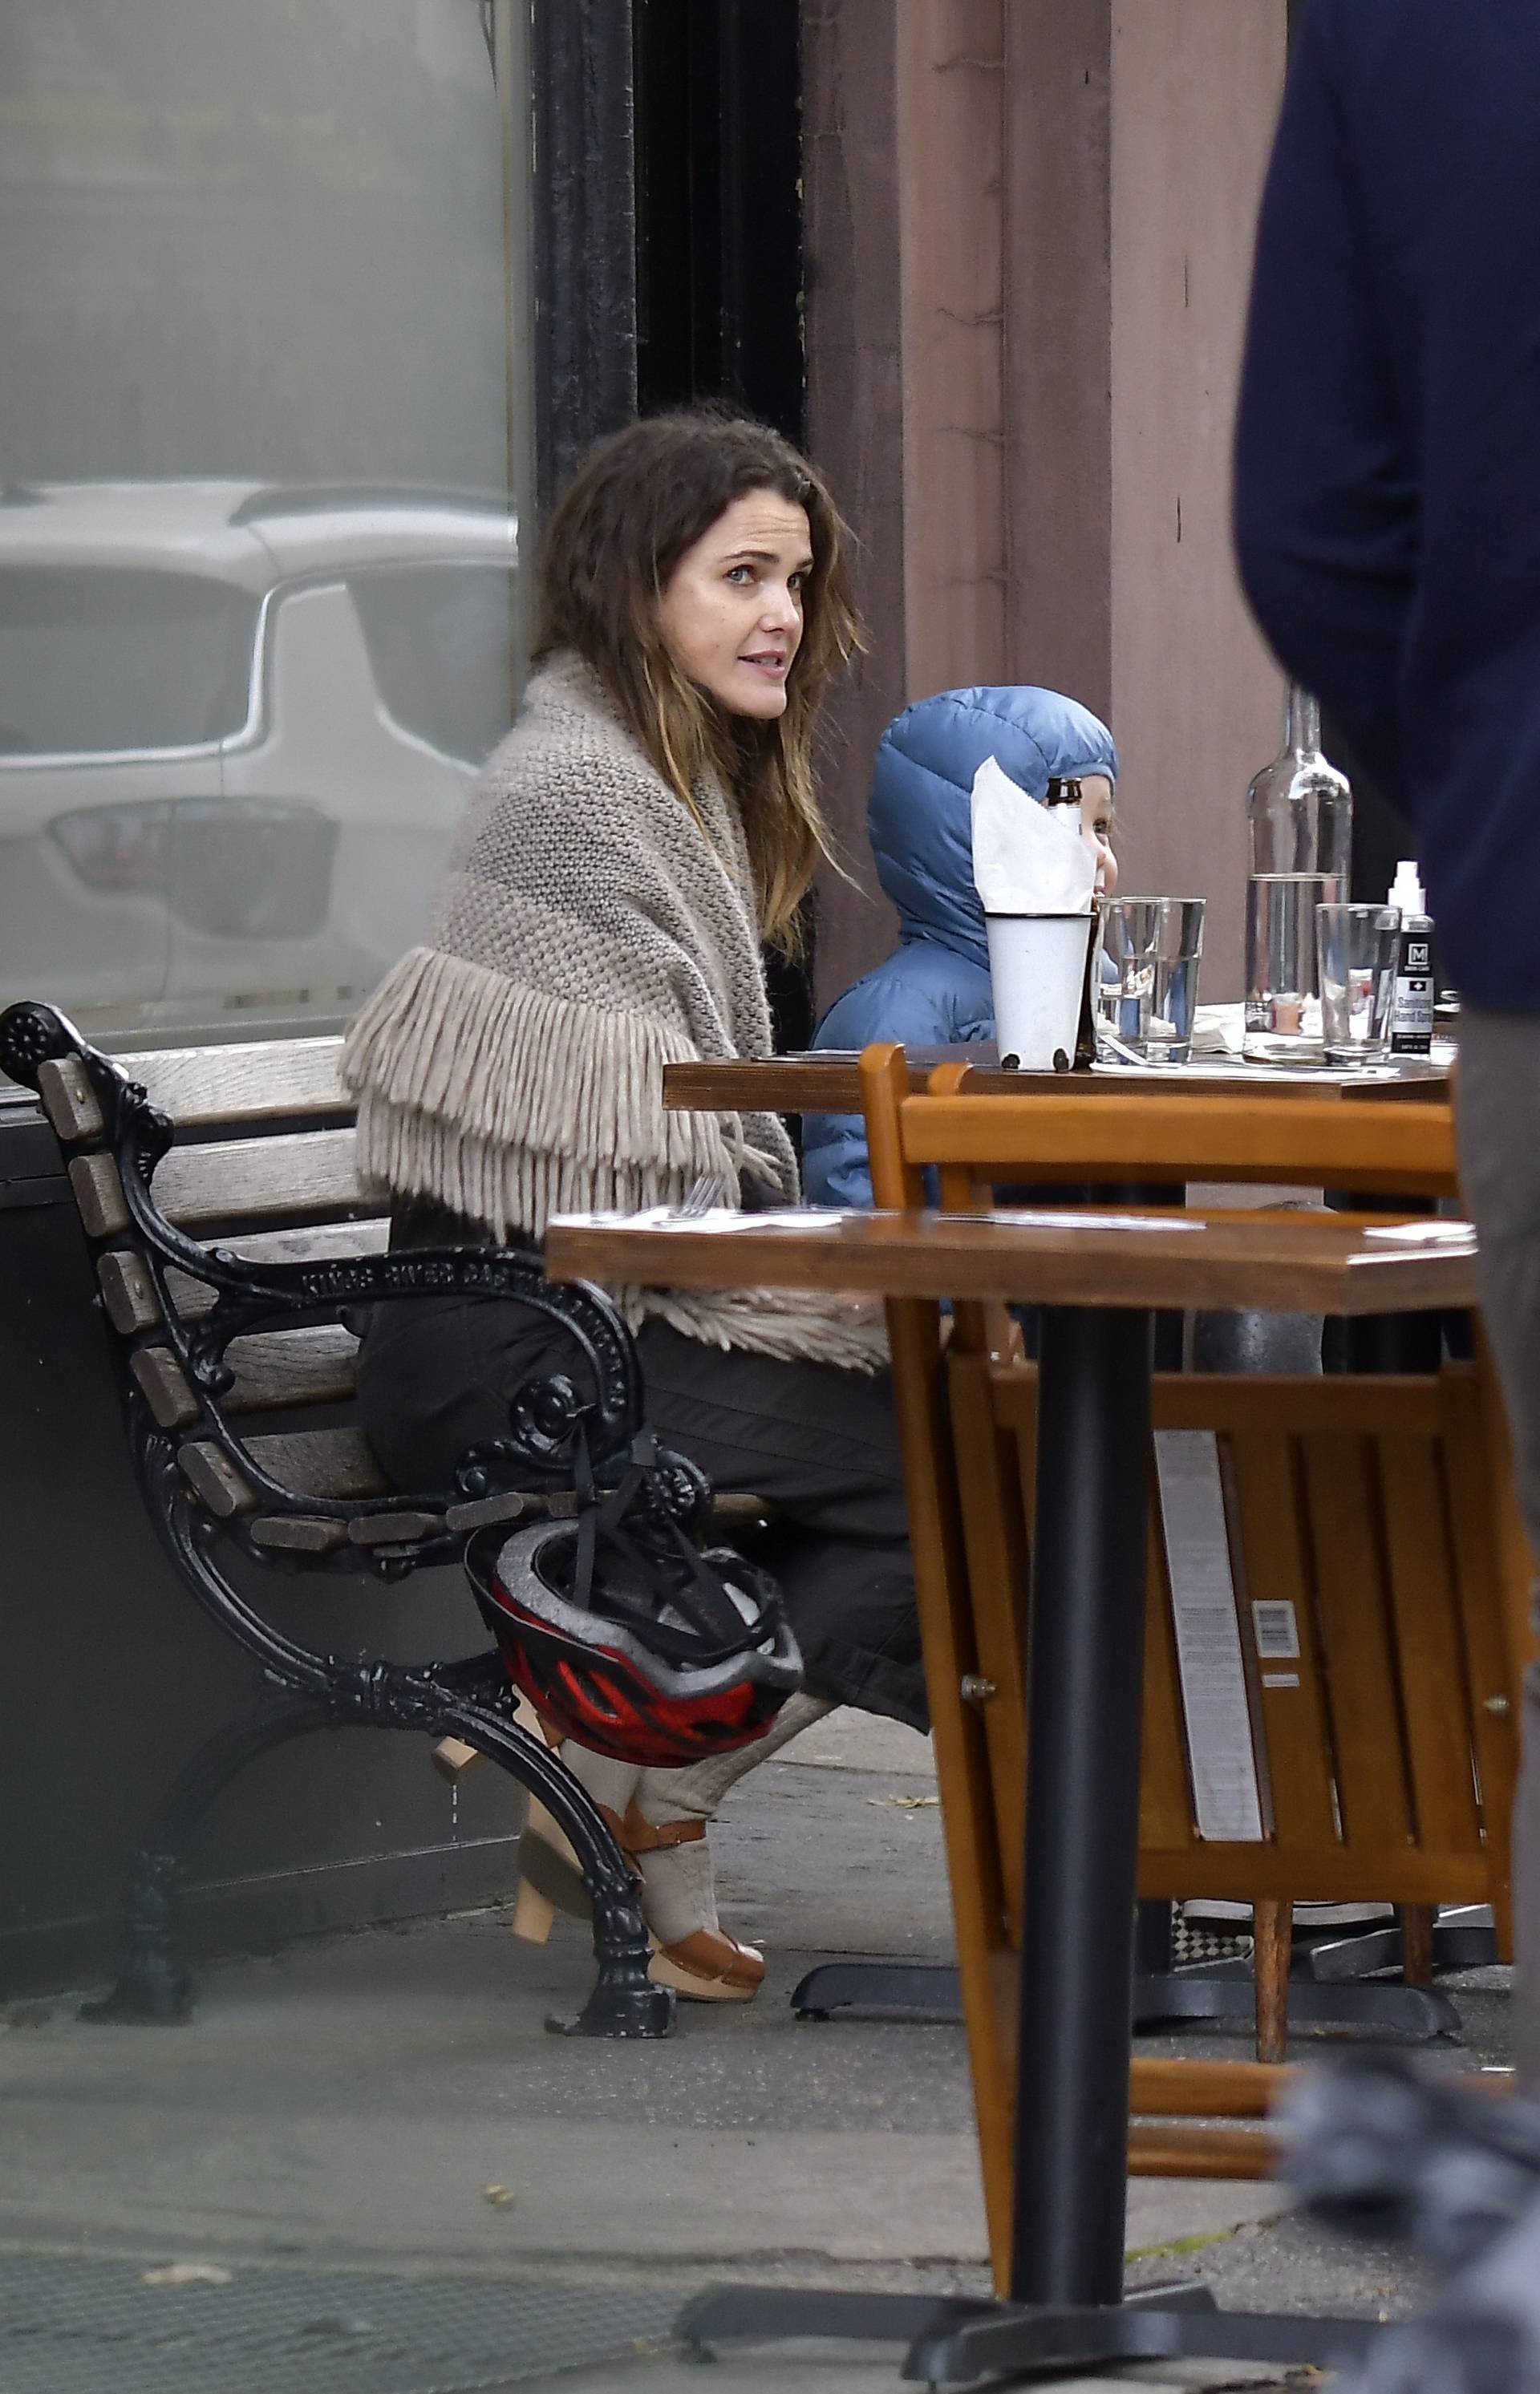 EXCLUSIVE: Keri Russell and Matthew Rhys Head to Brunch in Brooklyn